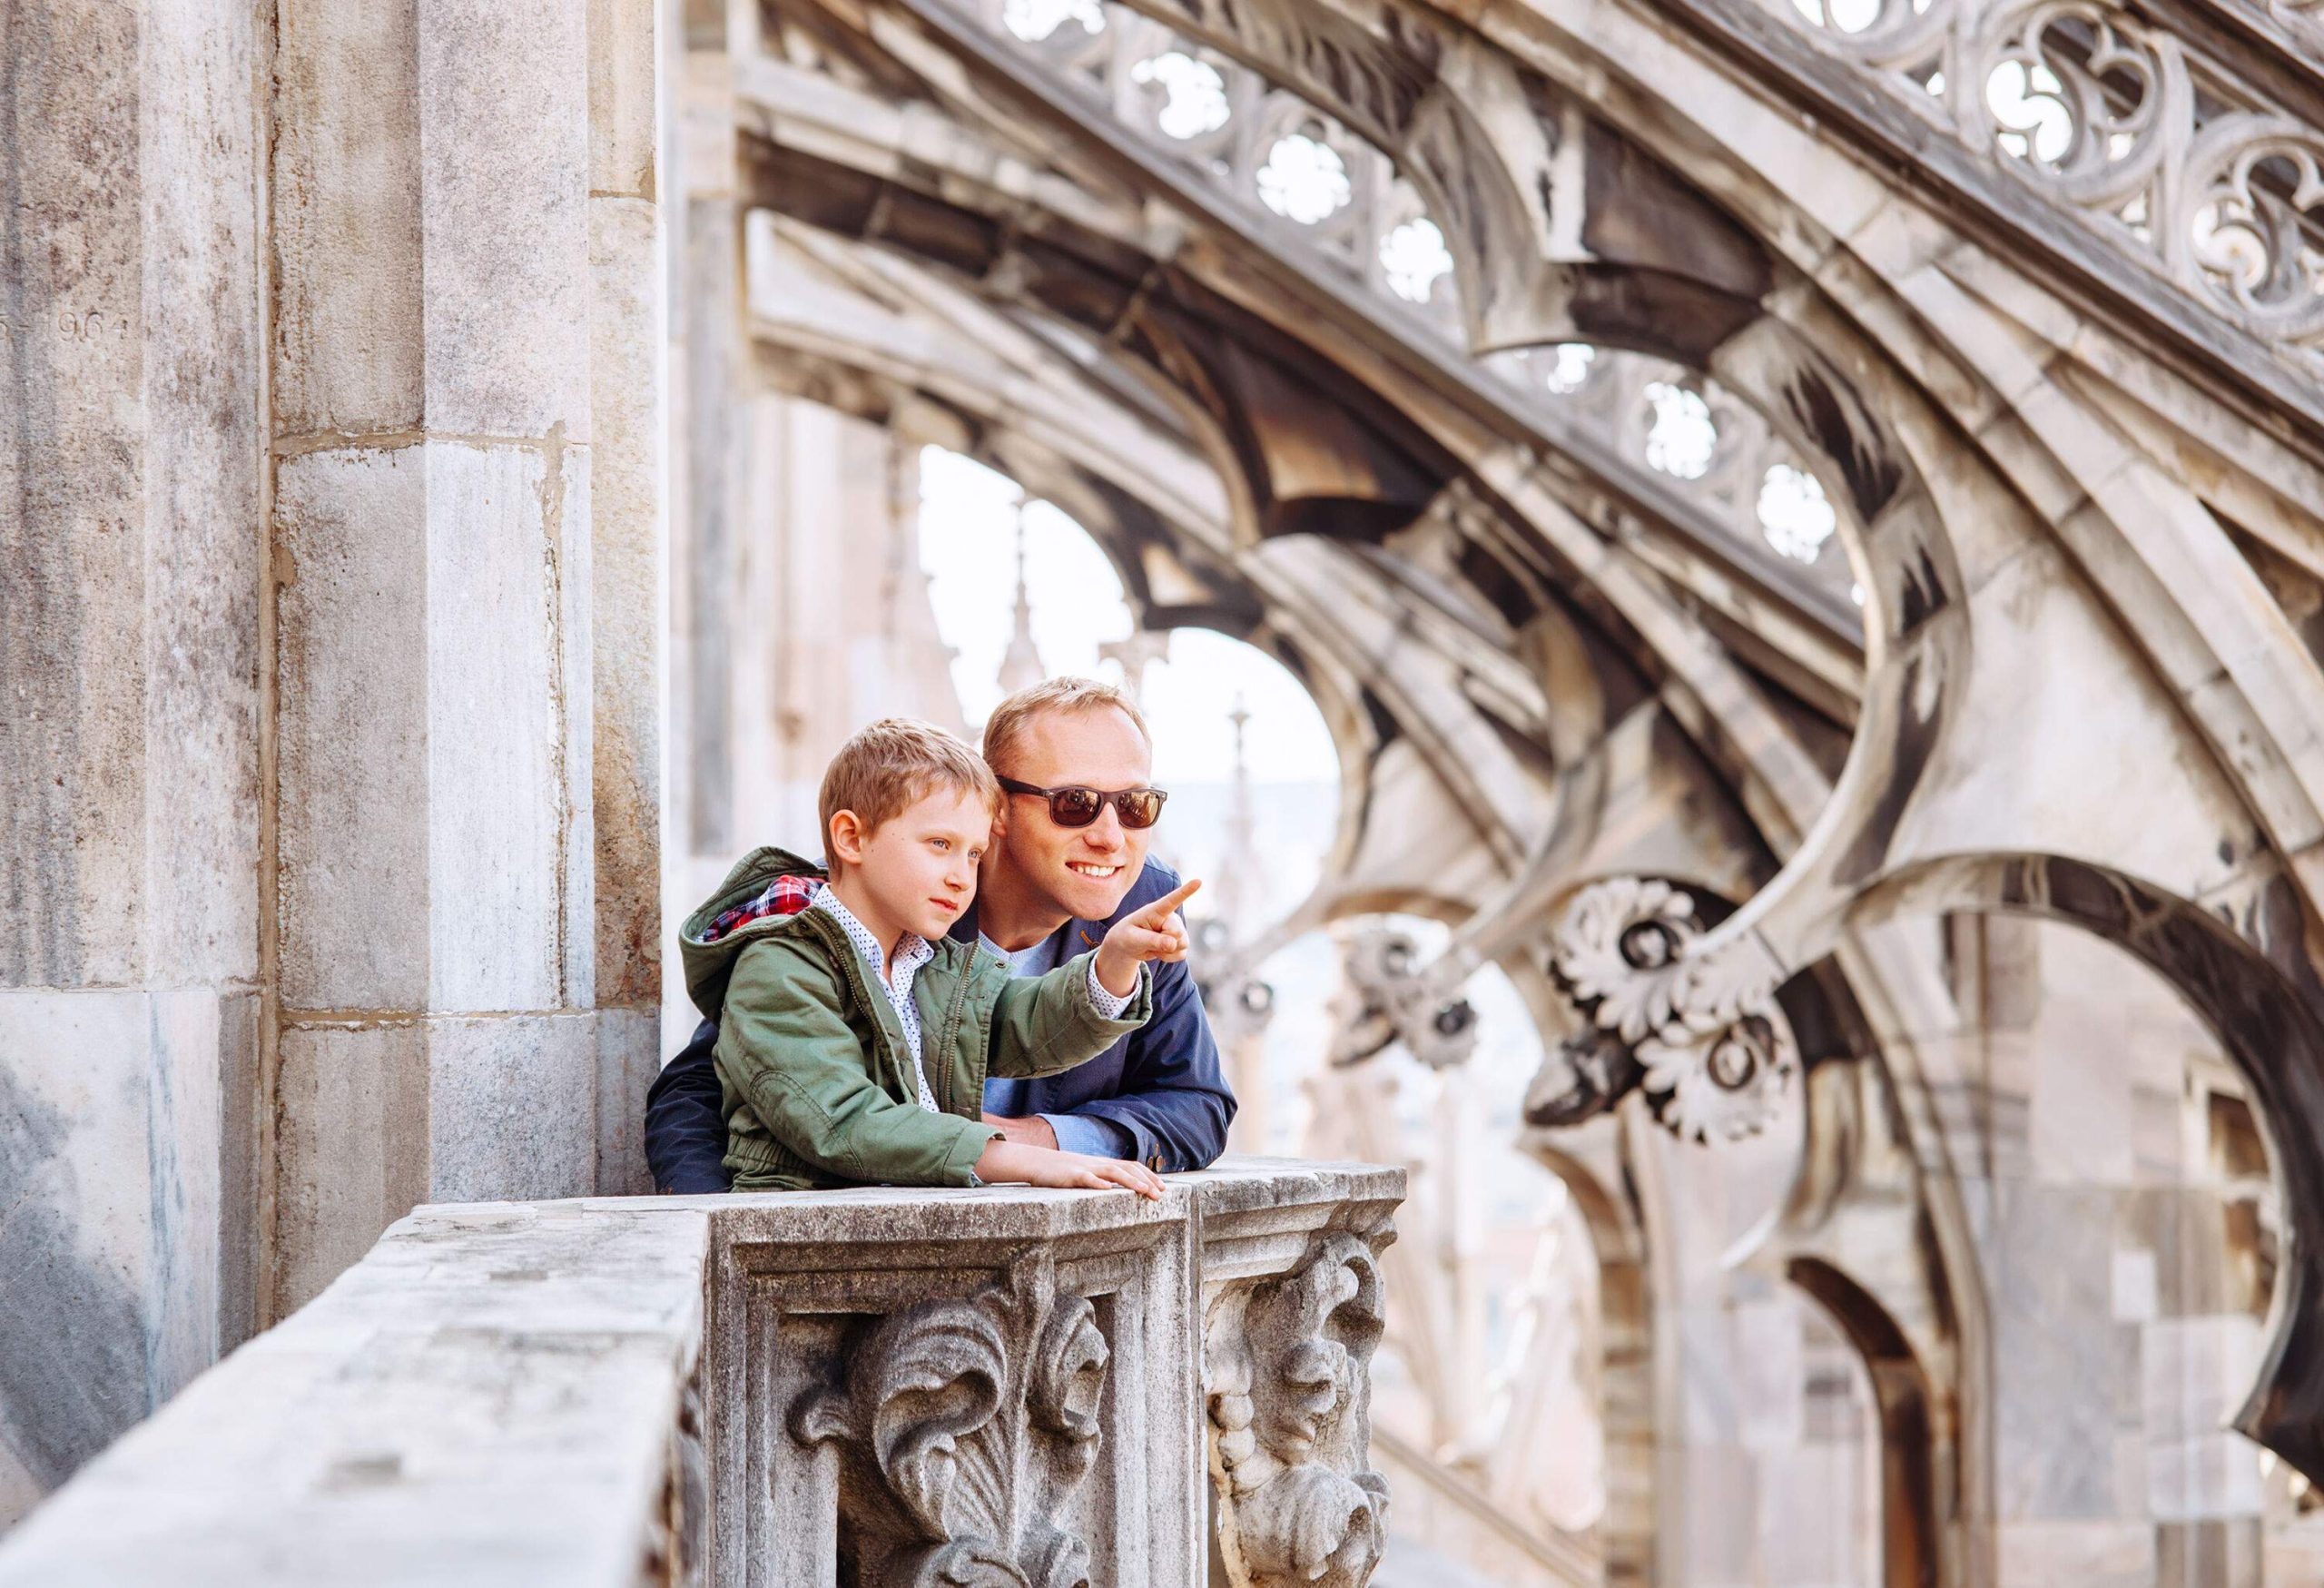 A son points something to his father while standing on the rooftop terrace of a majestic church.